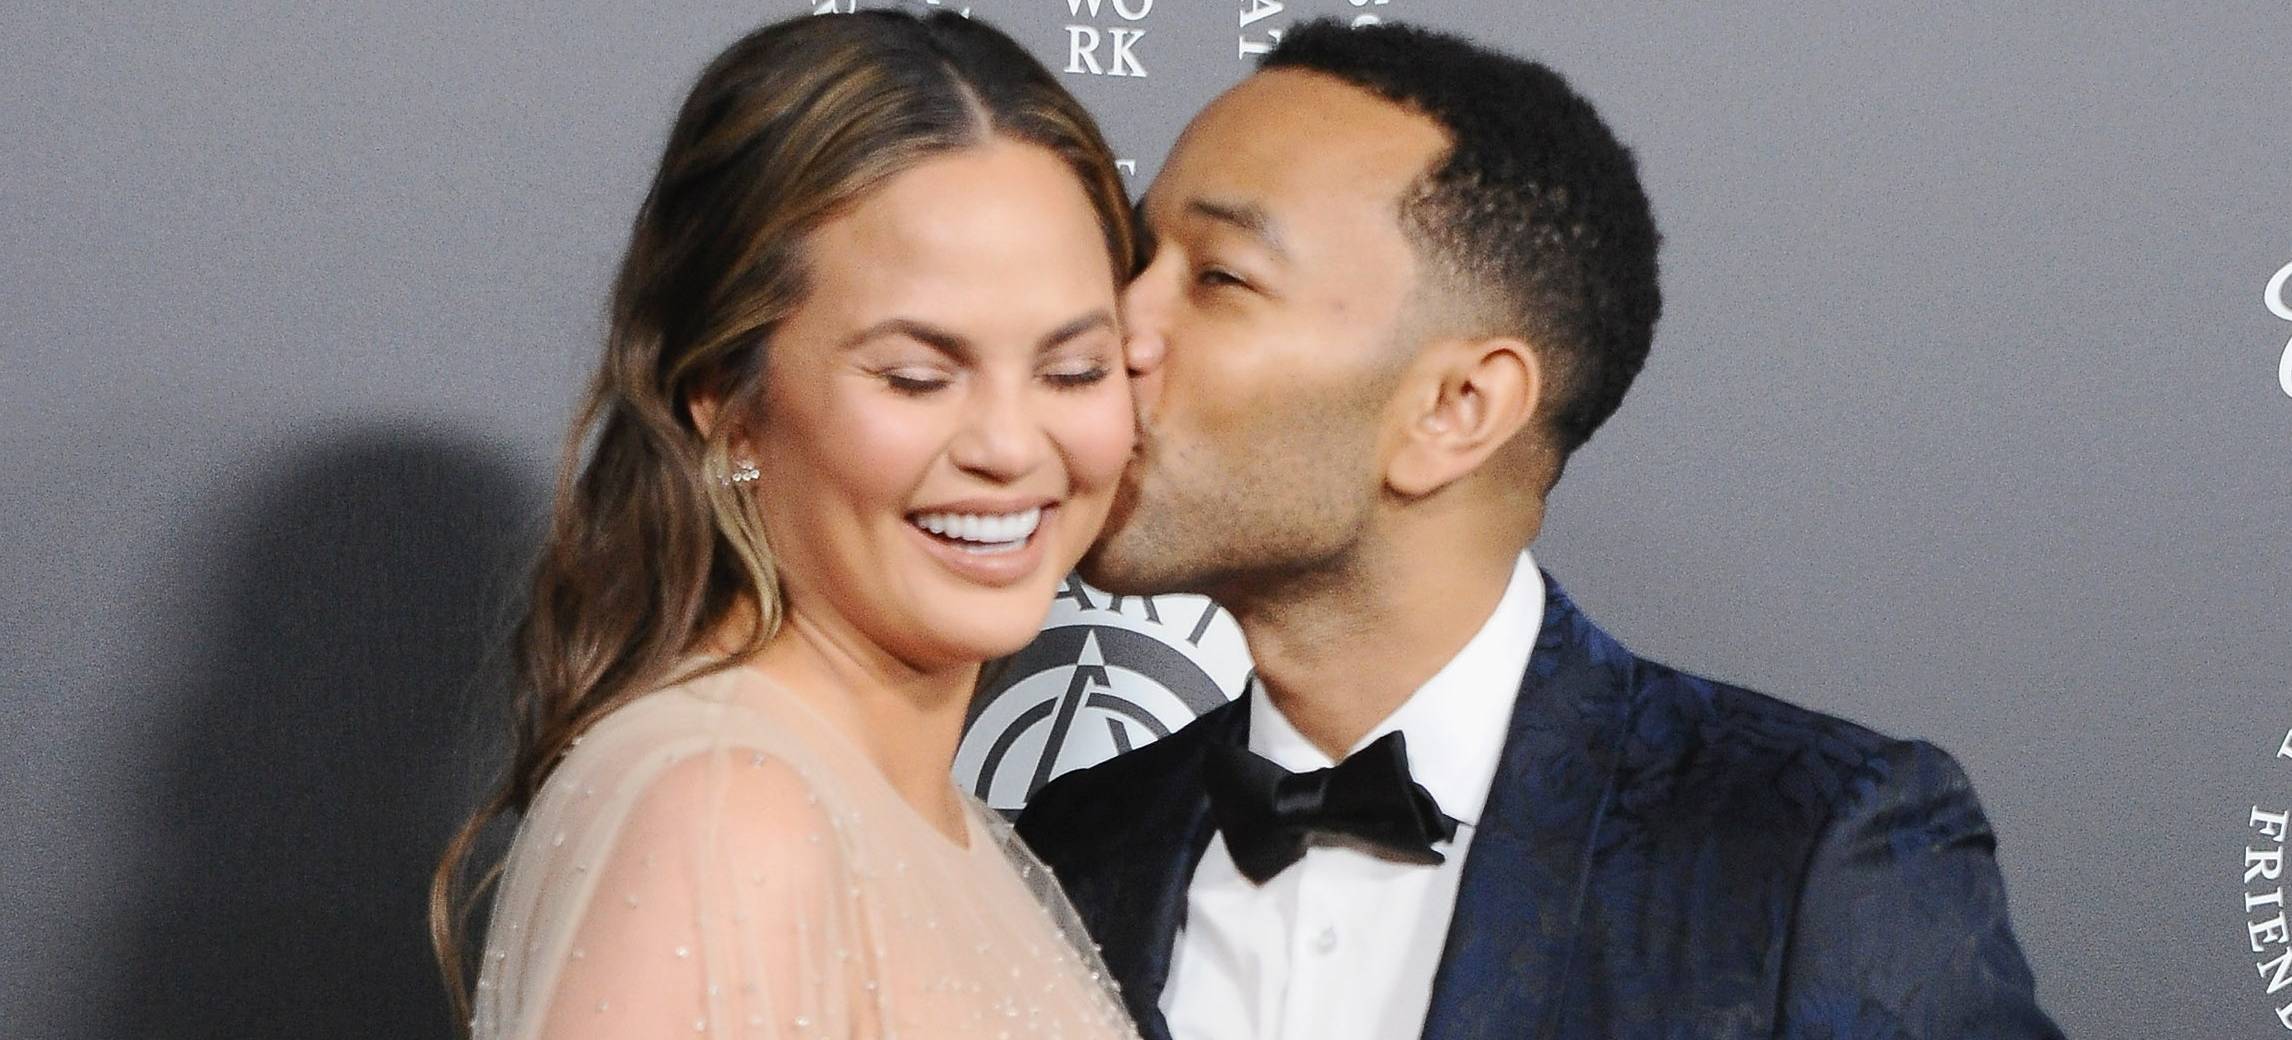 How Chrissy Teigen and John Legend’s Holiday Plans Are Changing This Year